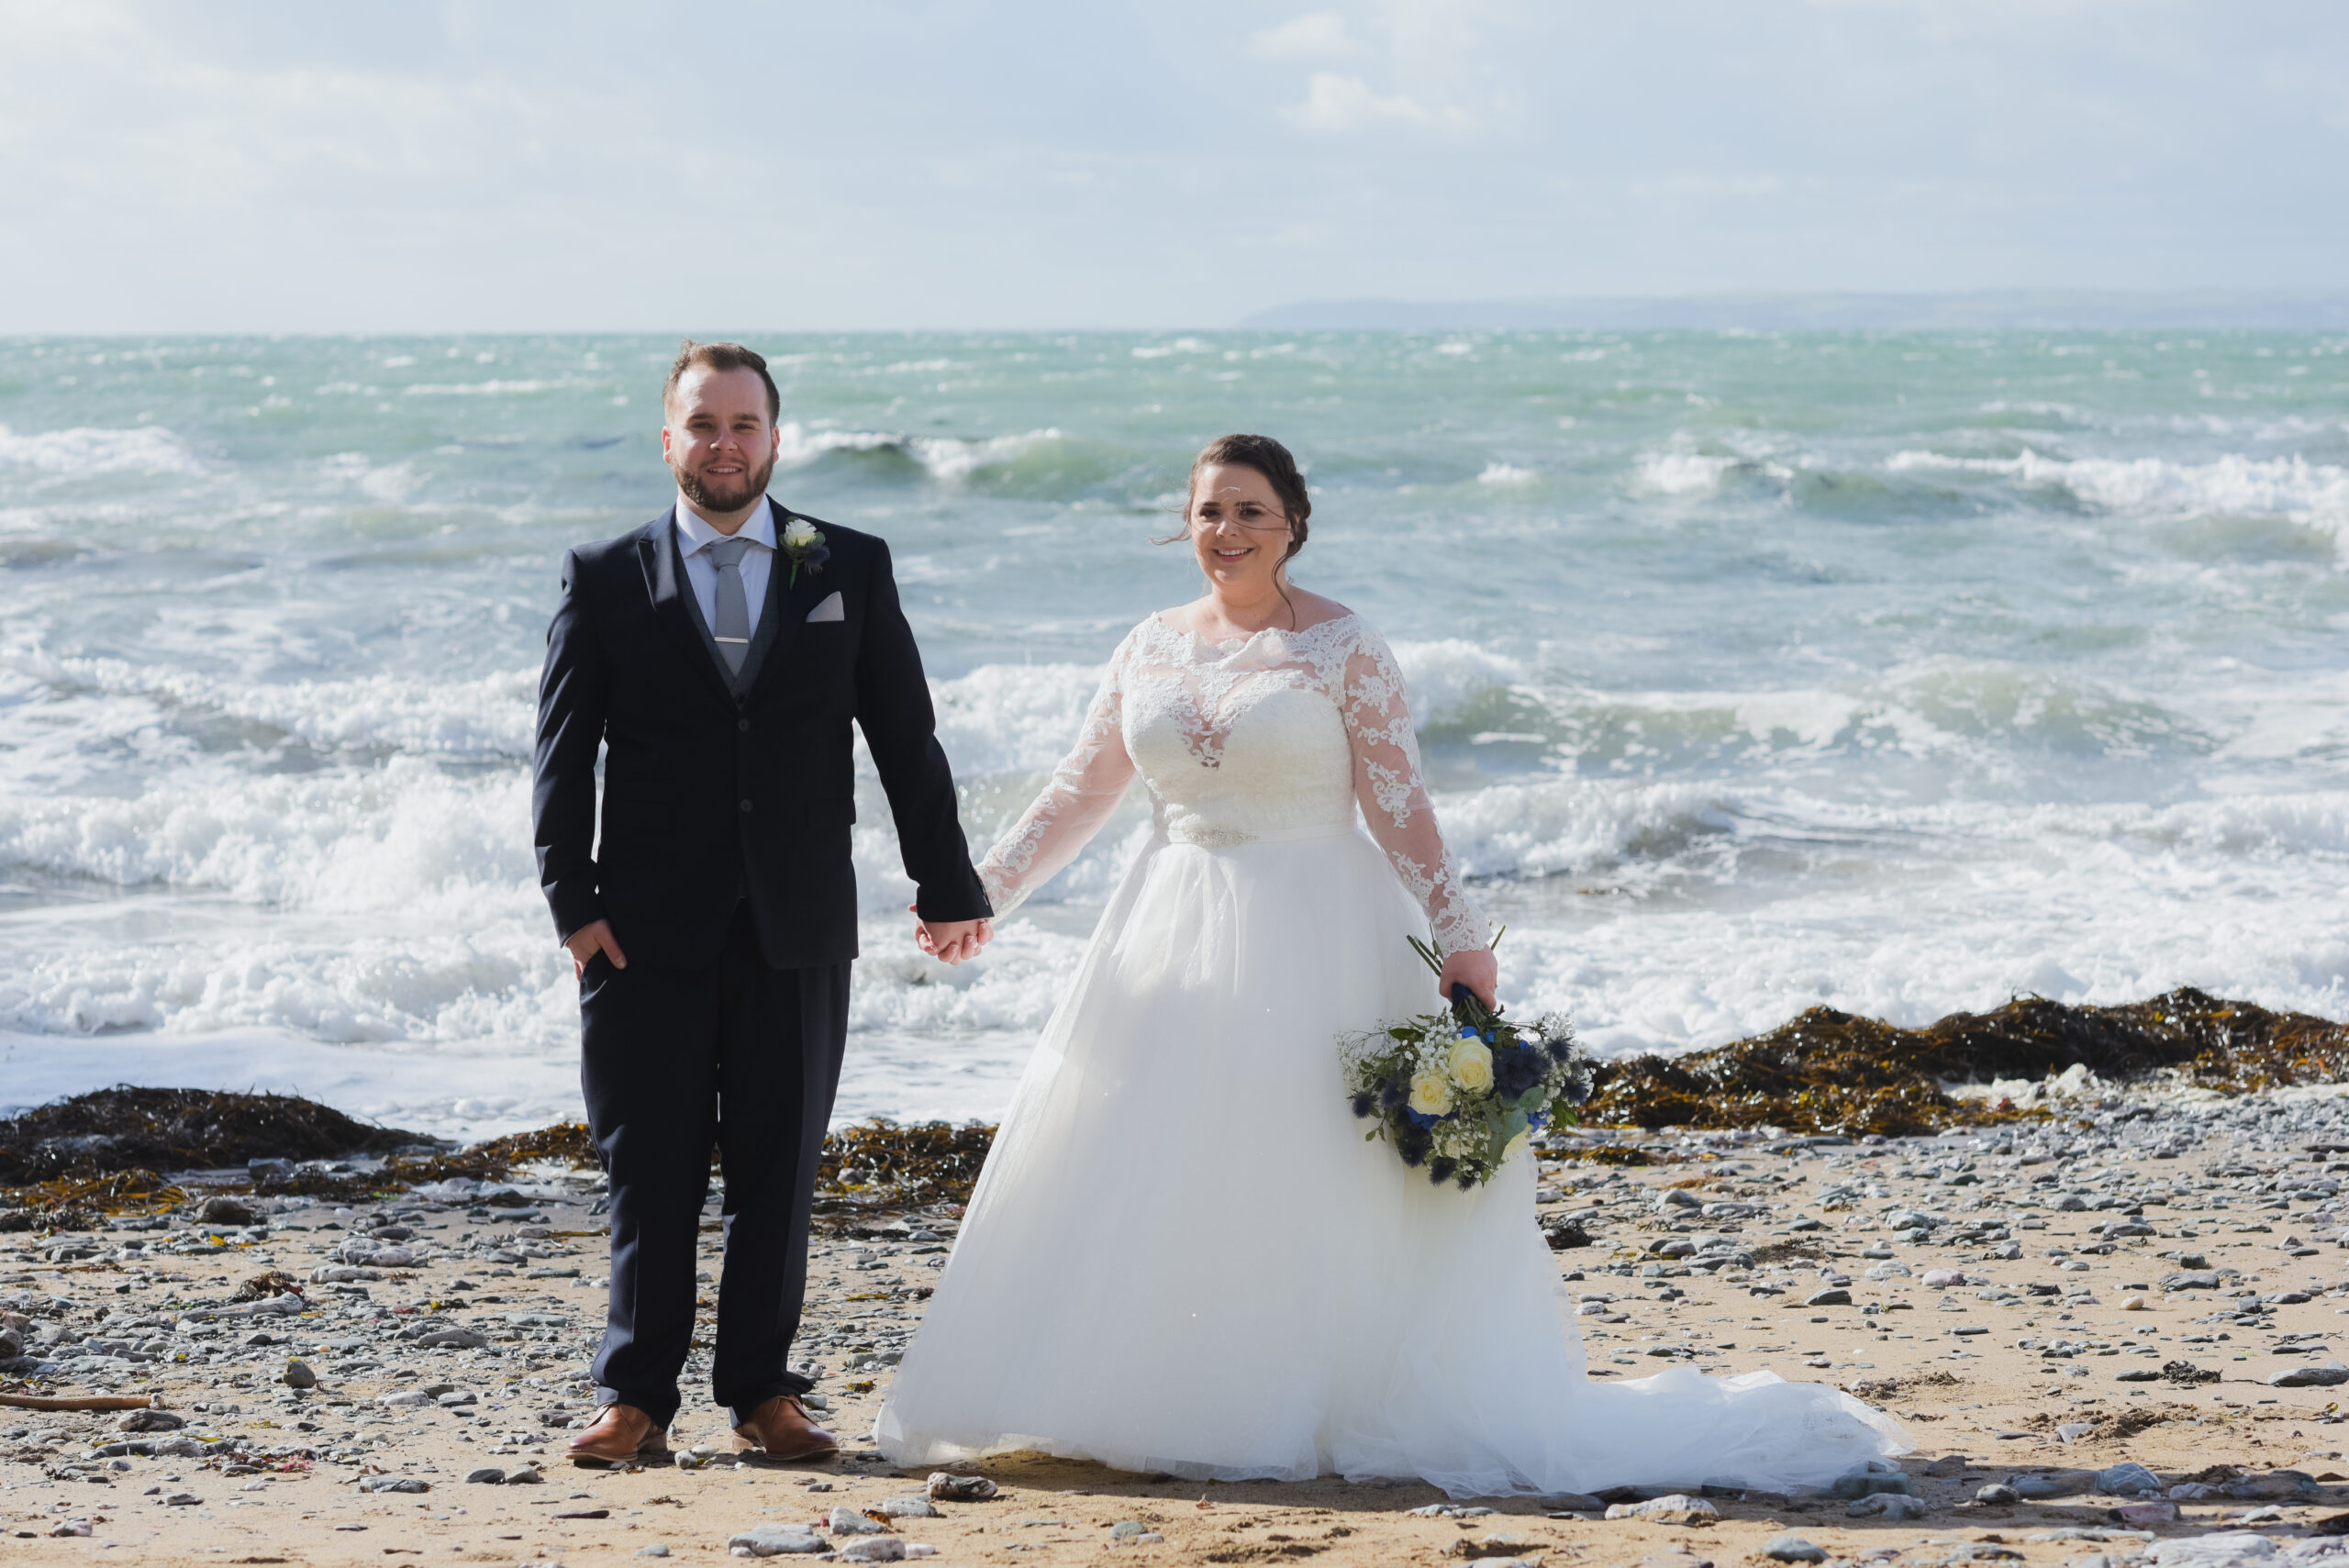 Wedding Photos at Polhawn Fort on the beach